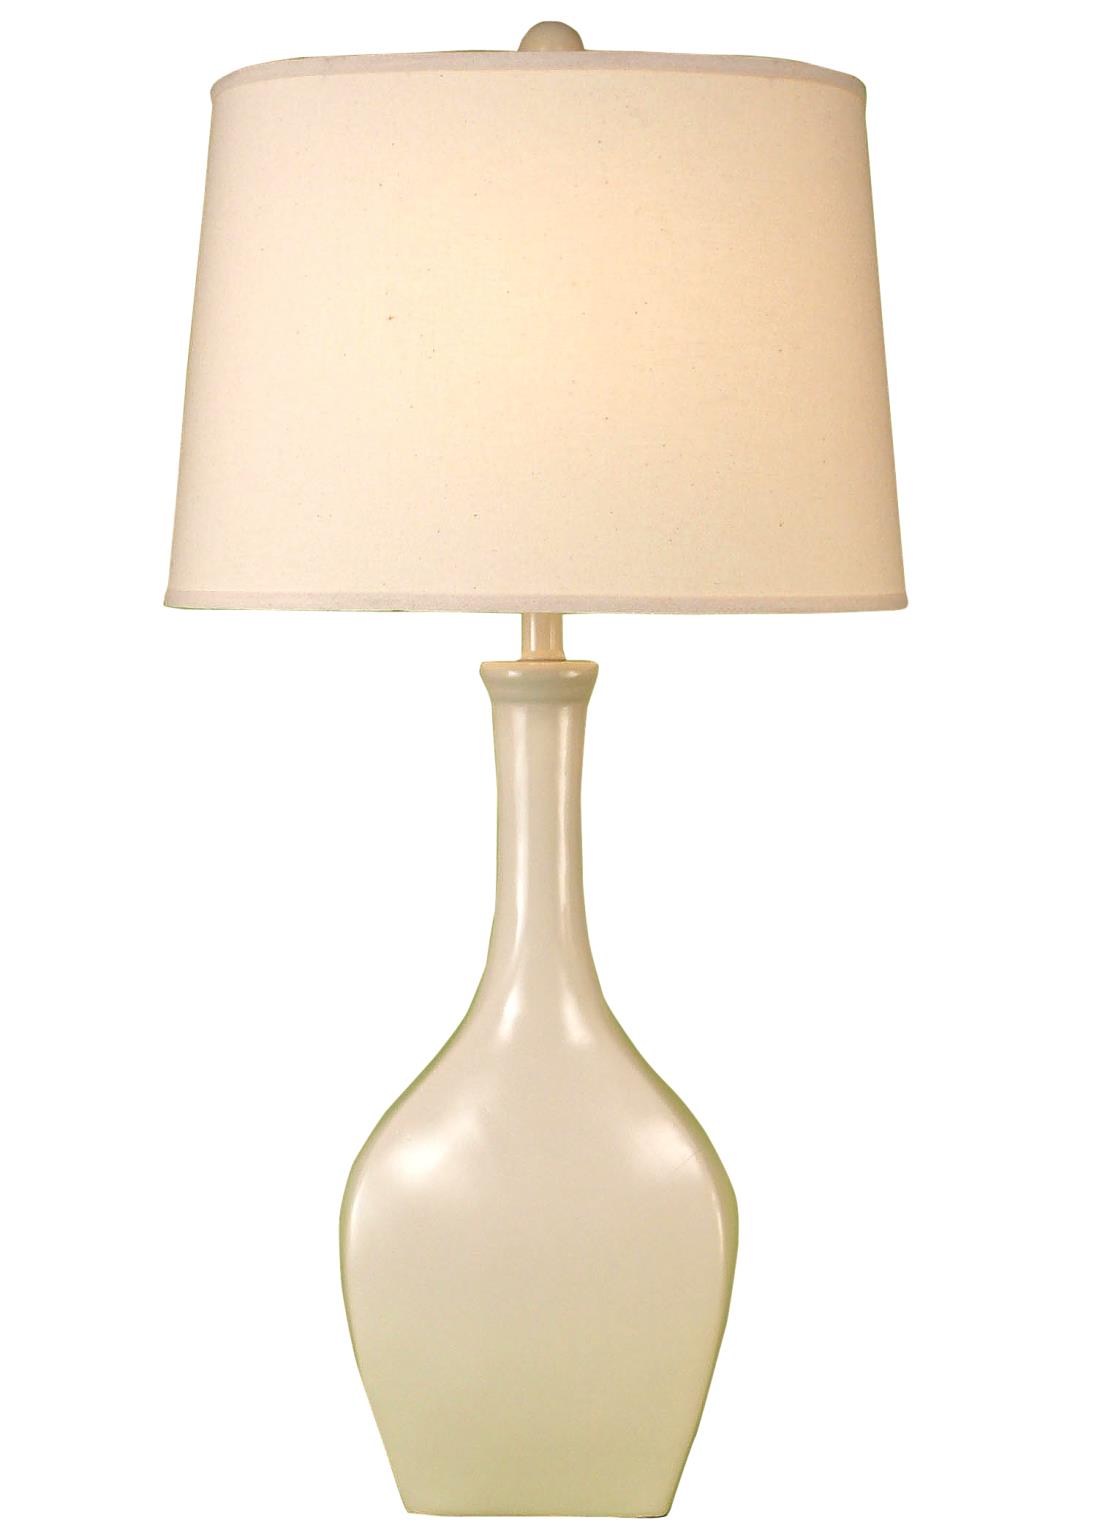 High Gloss Cottage Oval Genie Table Lamp